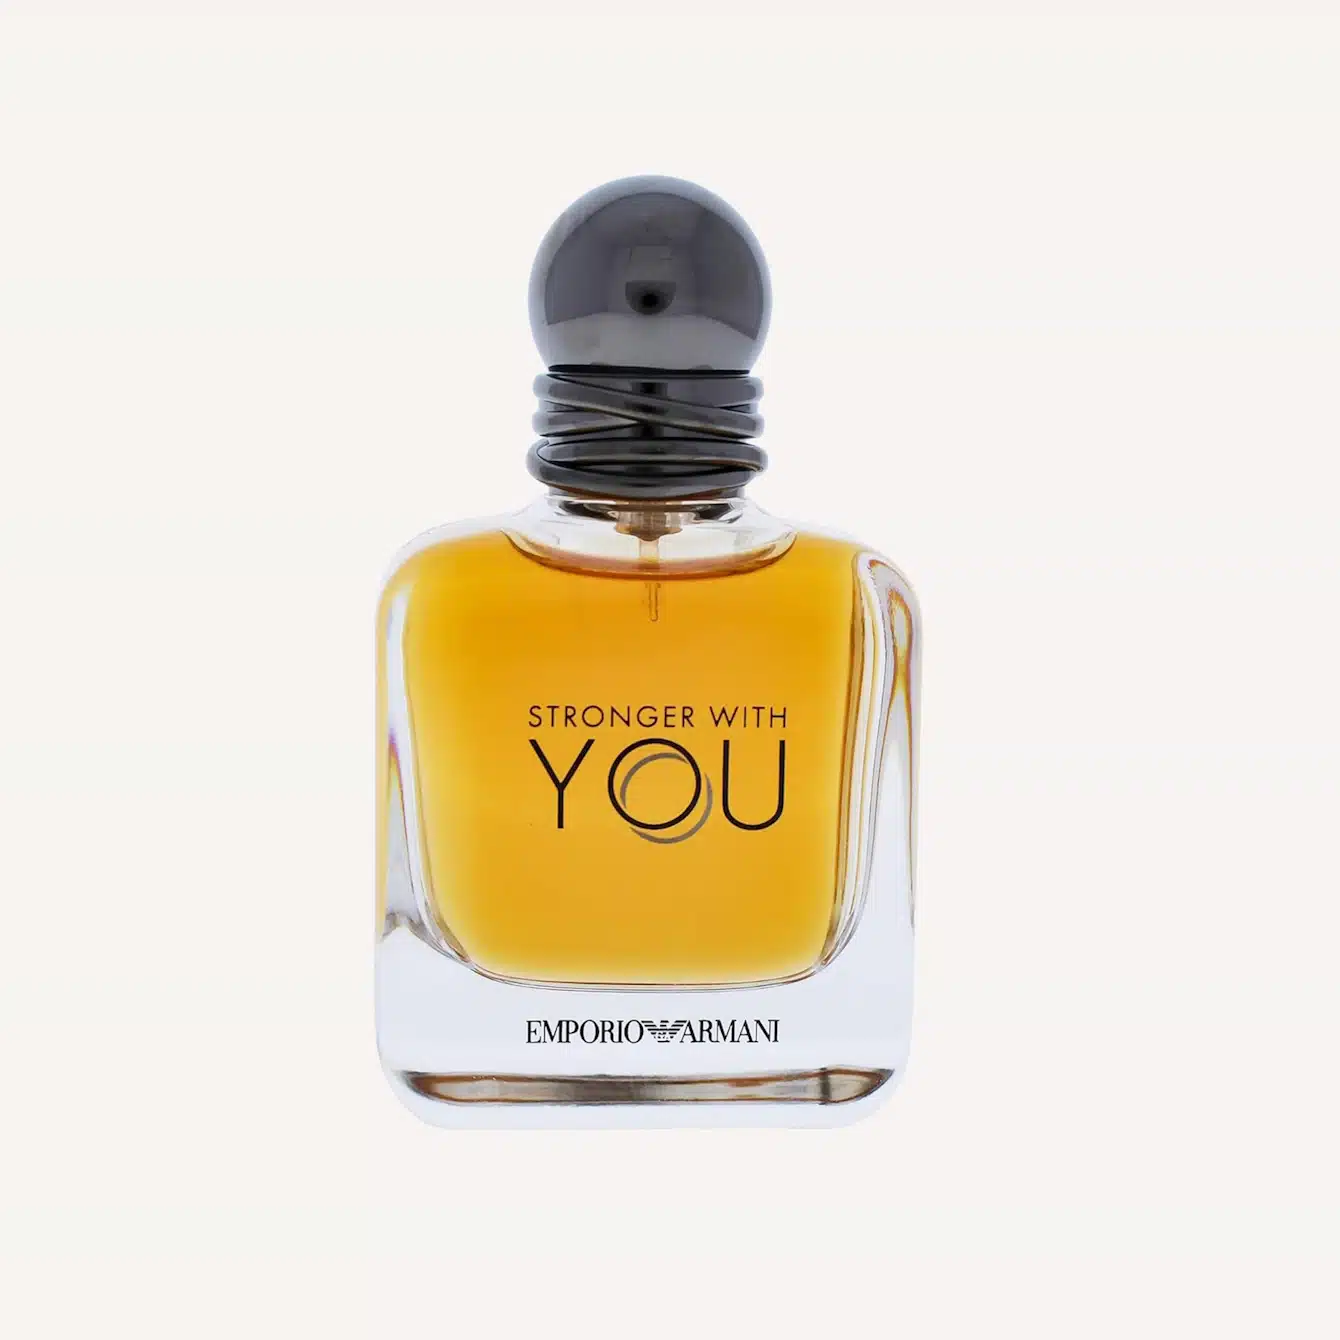 A bottle of Stronger With You cologne from Emporio Armani